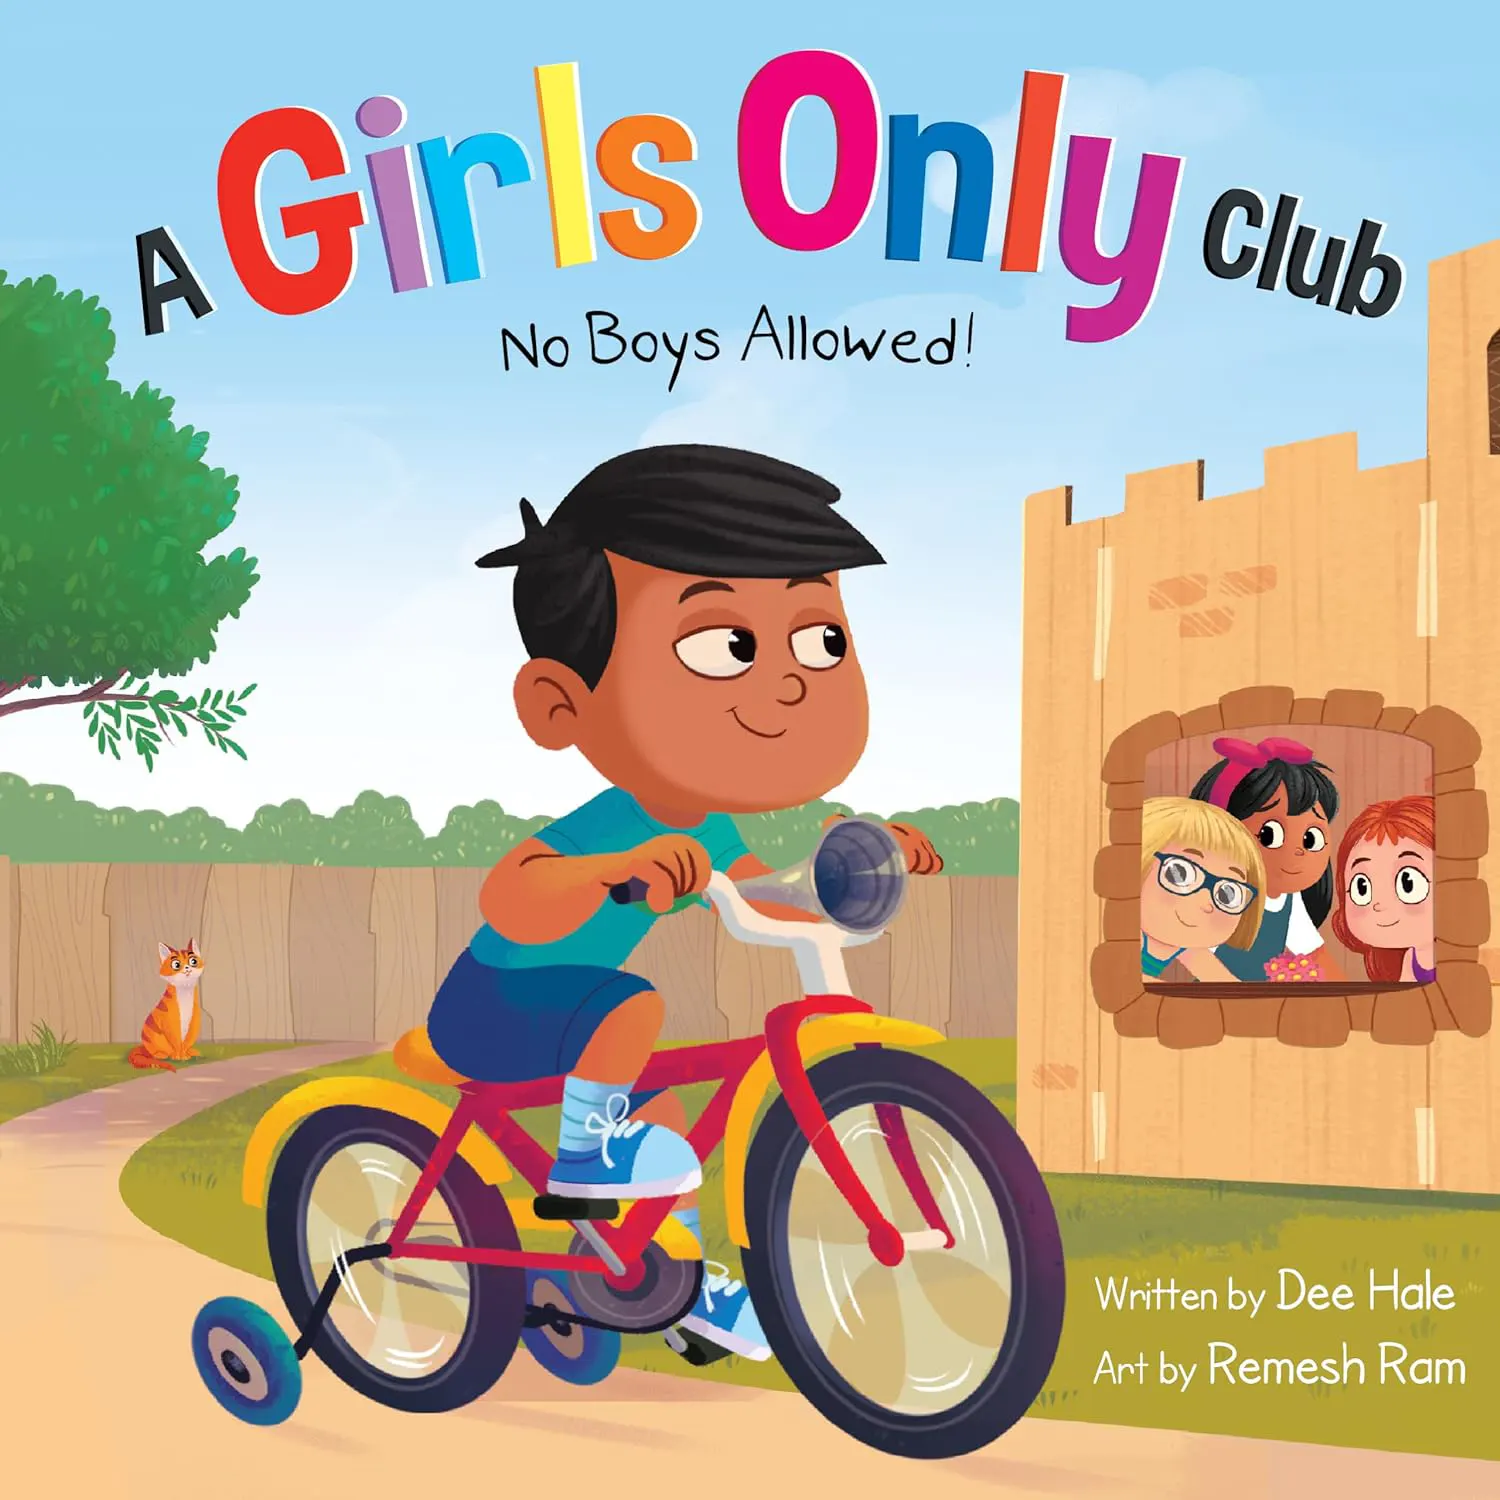 A Girls Only Club - No Boys Allowed